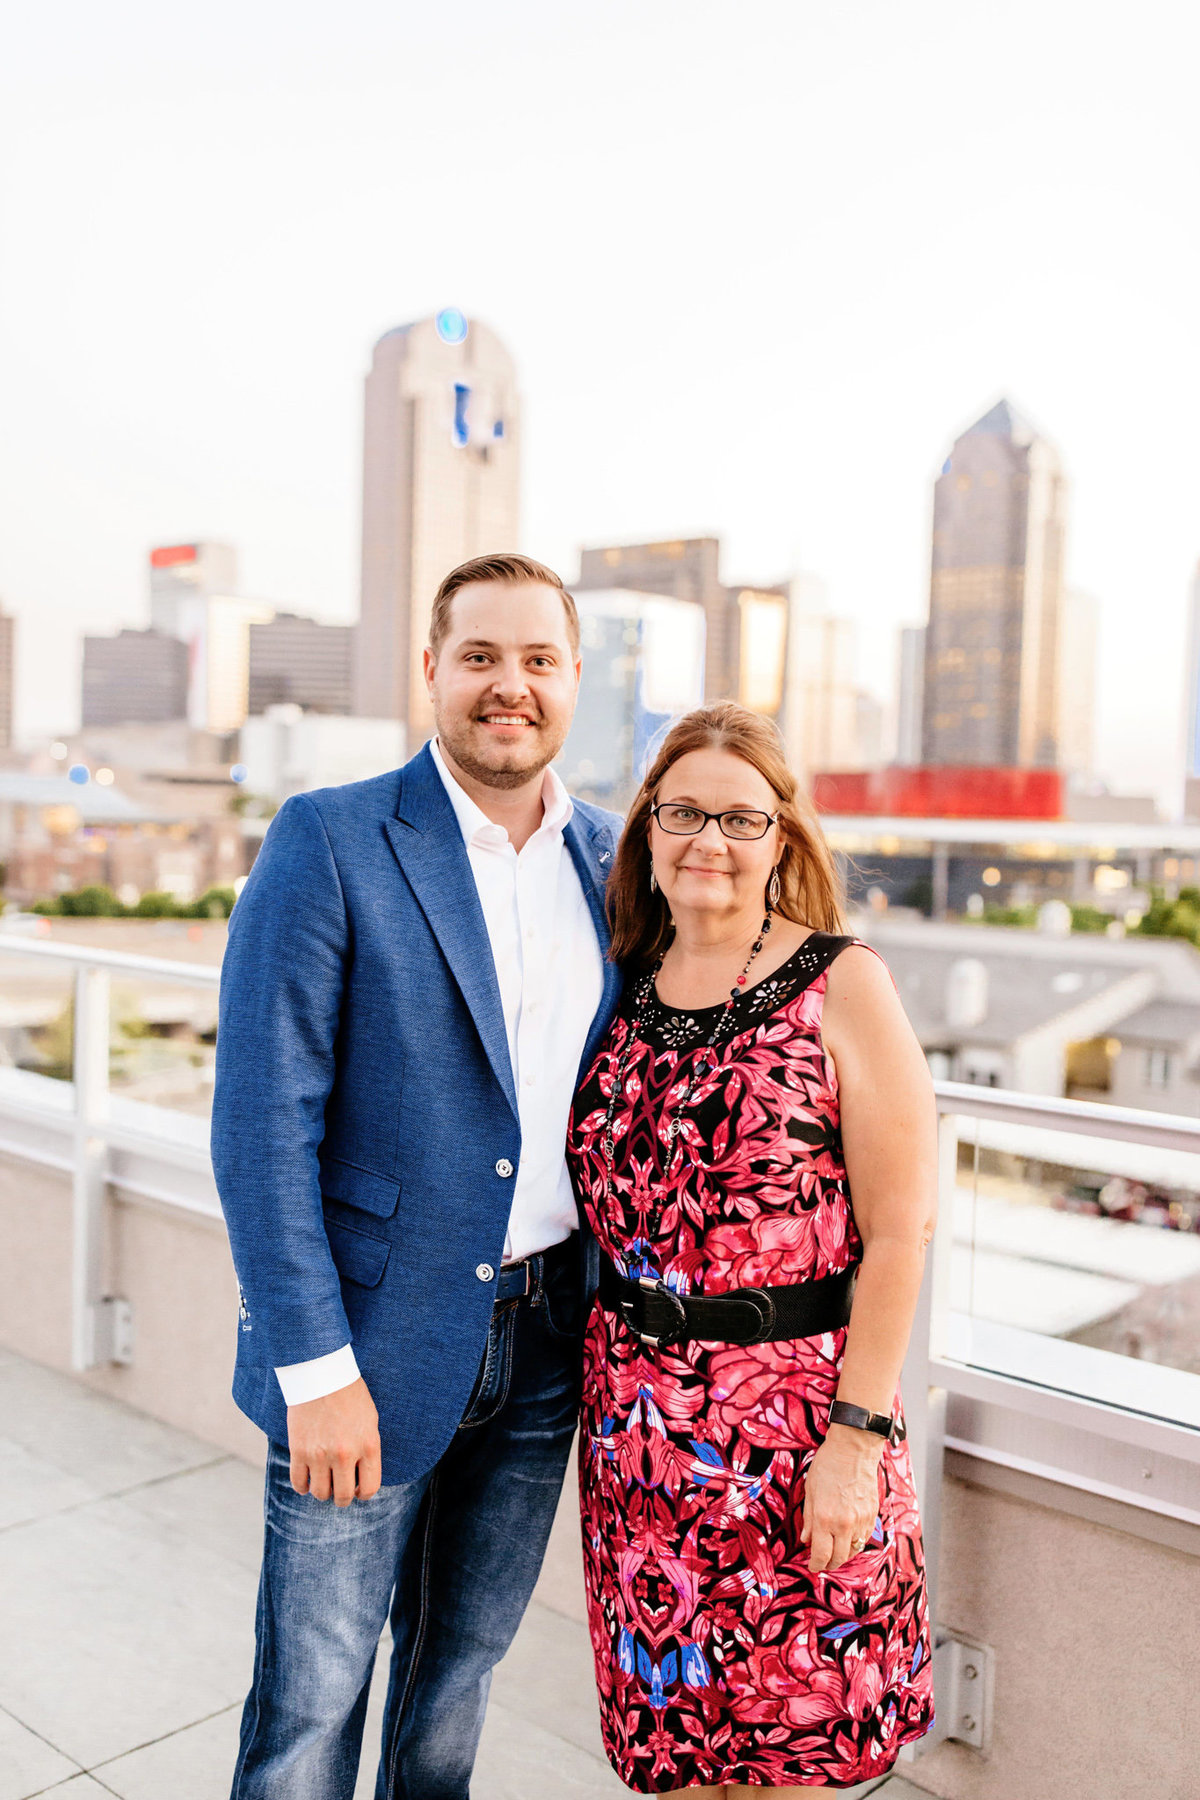 Eric & Megan - Downtown Dallas Rooftop Proposal & Engagement Session-247